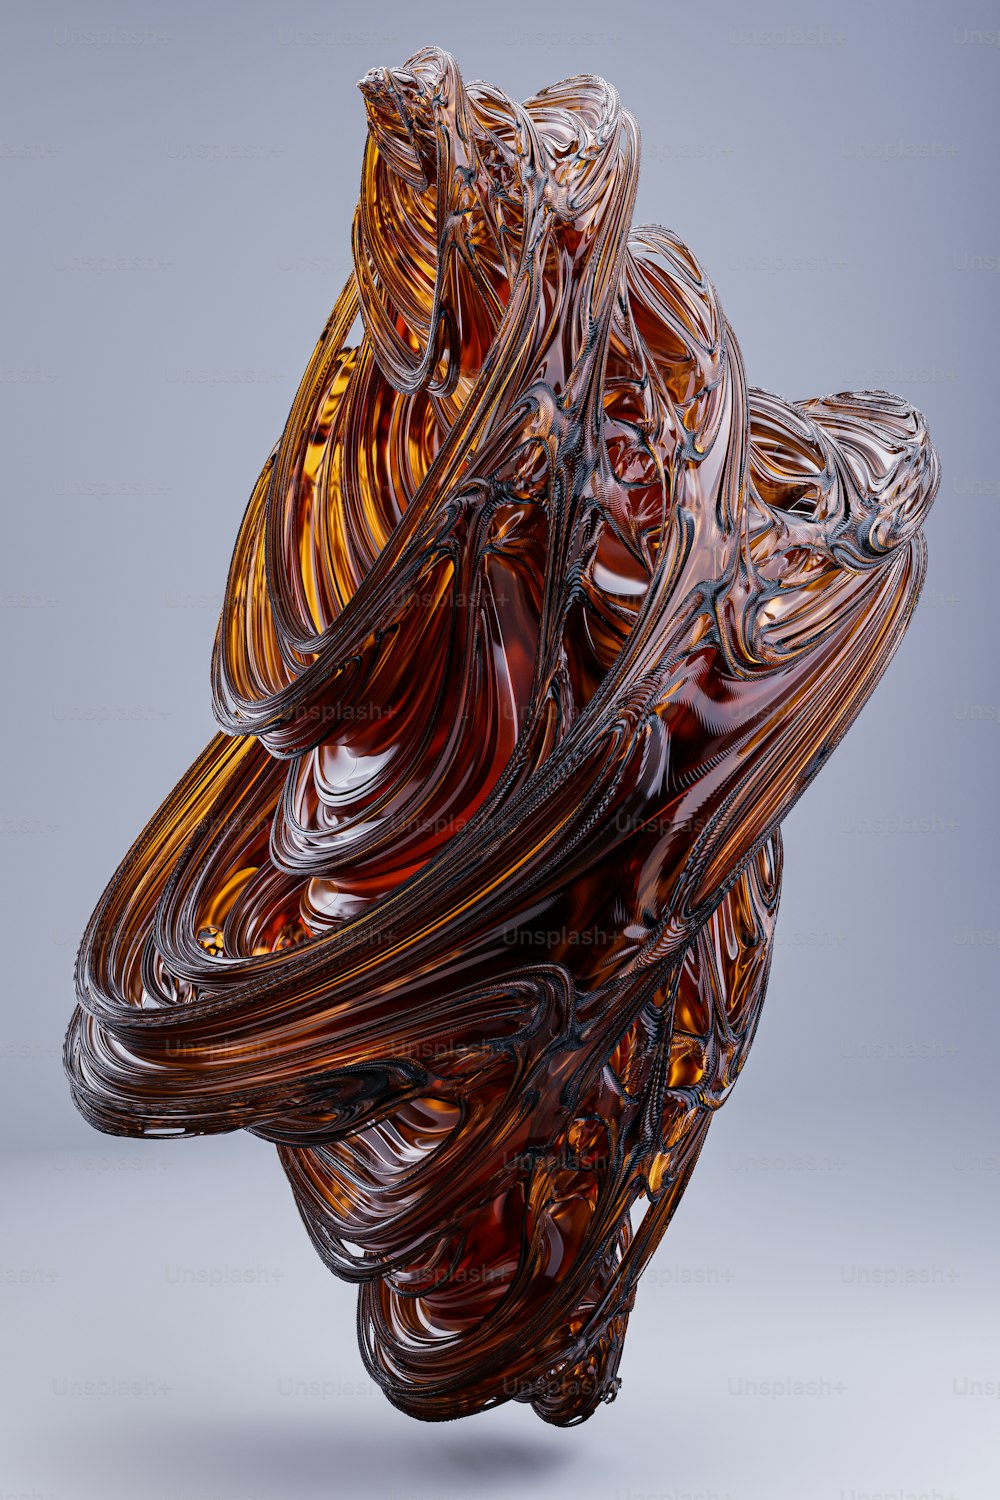 a glass sculpture is shown on a gray background